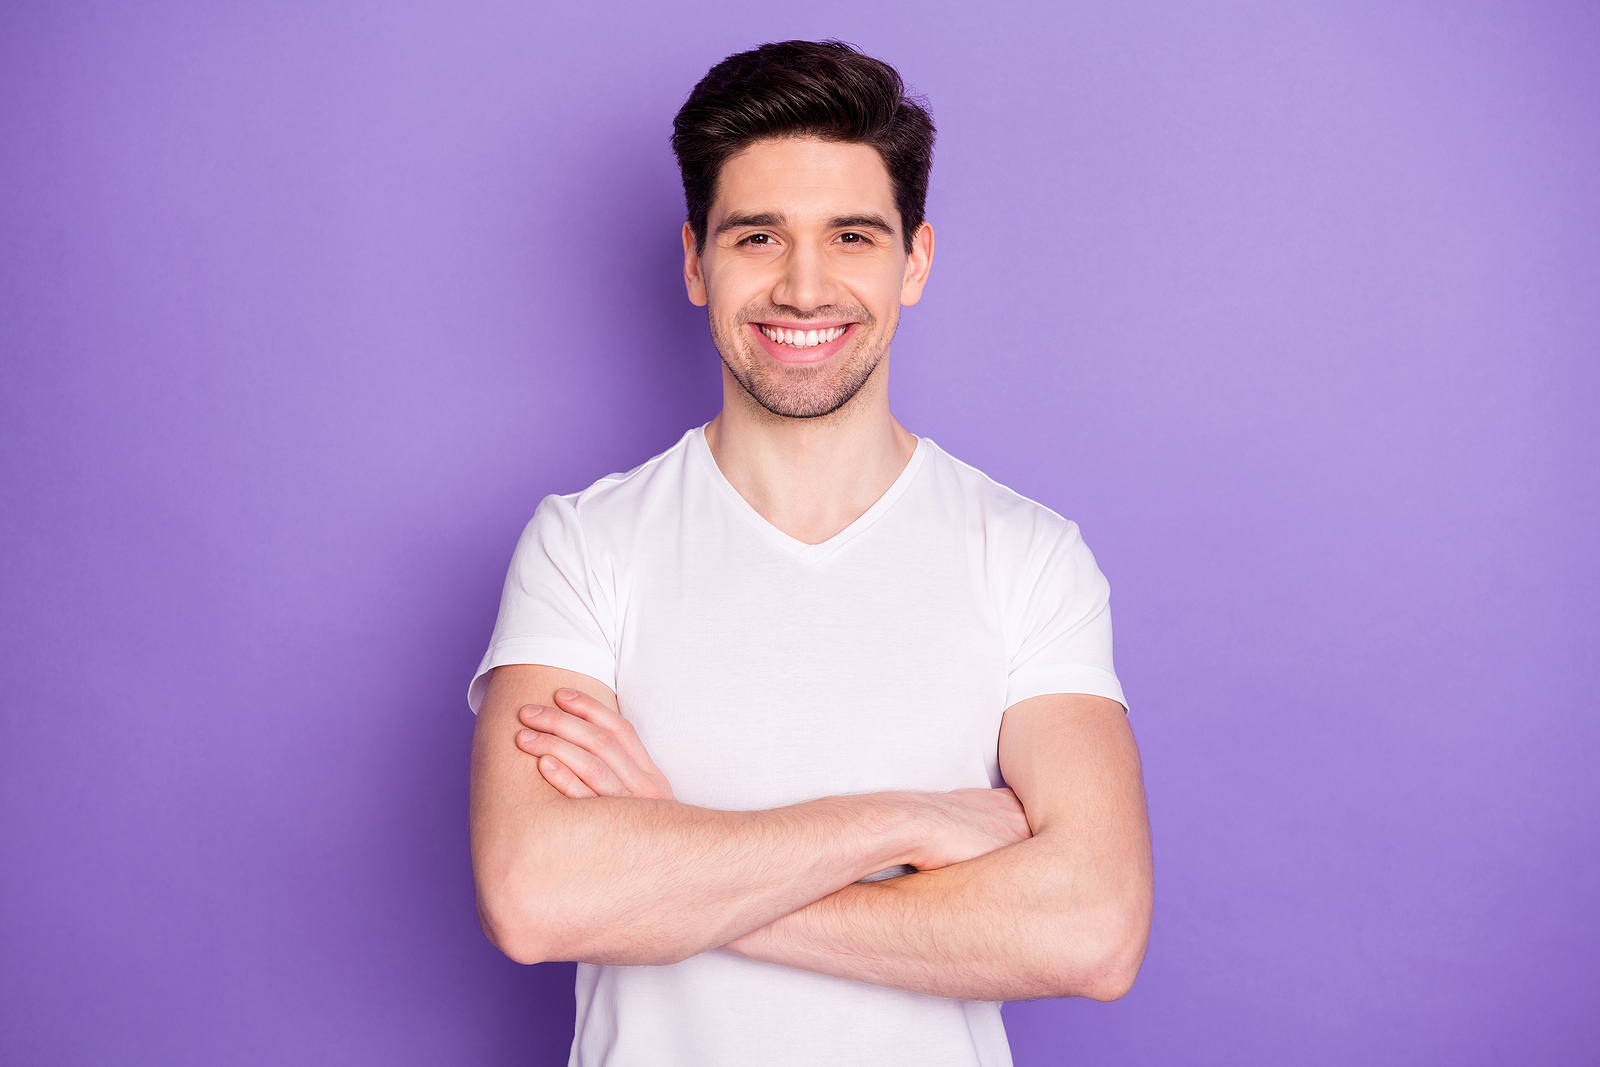 A confident man wearing a white t shirt crosses his arms and smiles against a purple background.